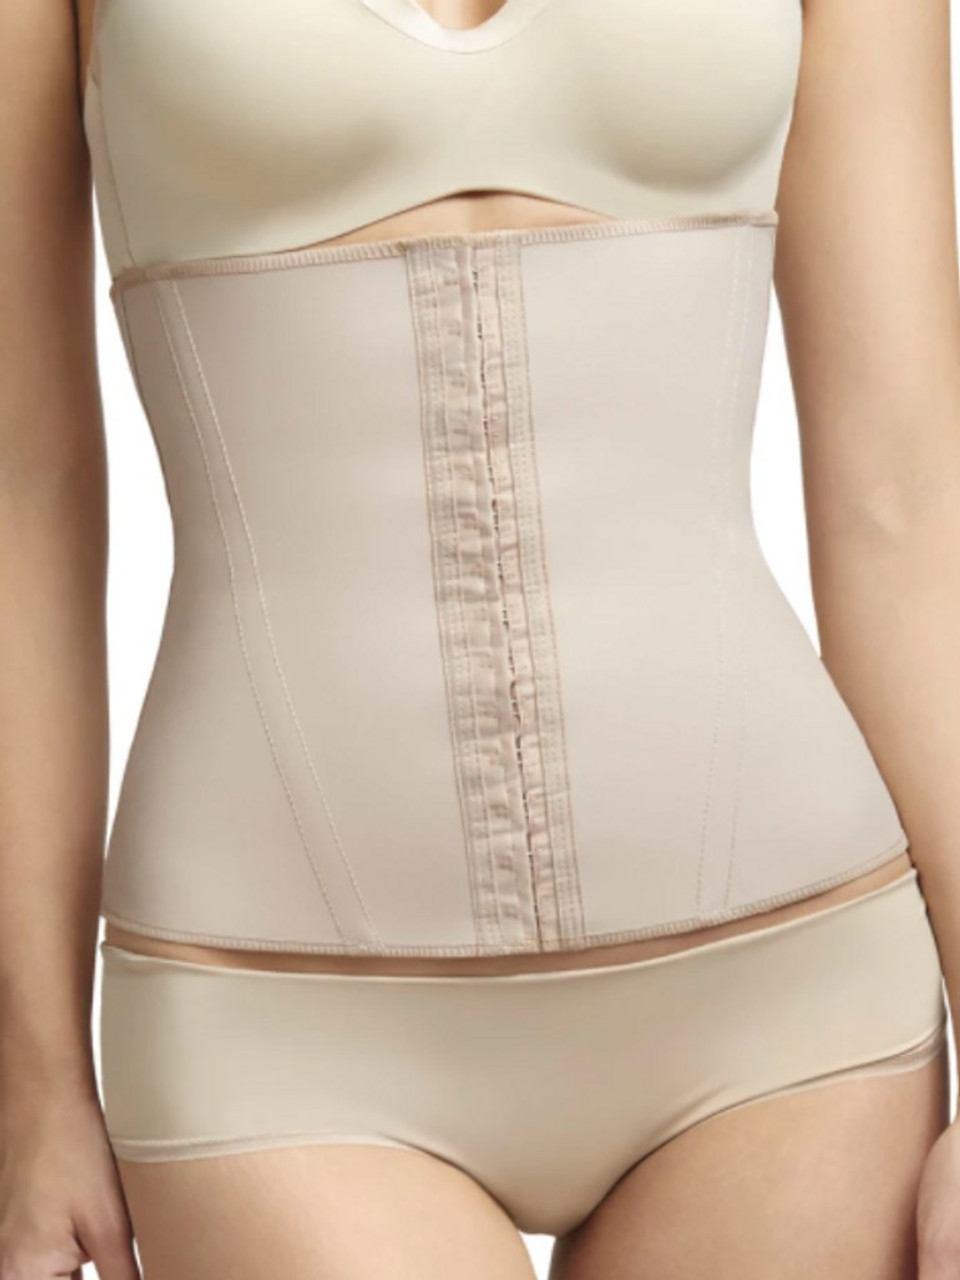 Squeem Perfect Waist Cincher Shapewear Review